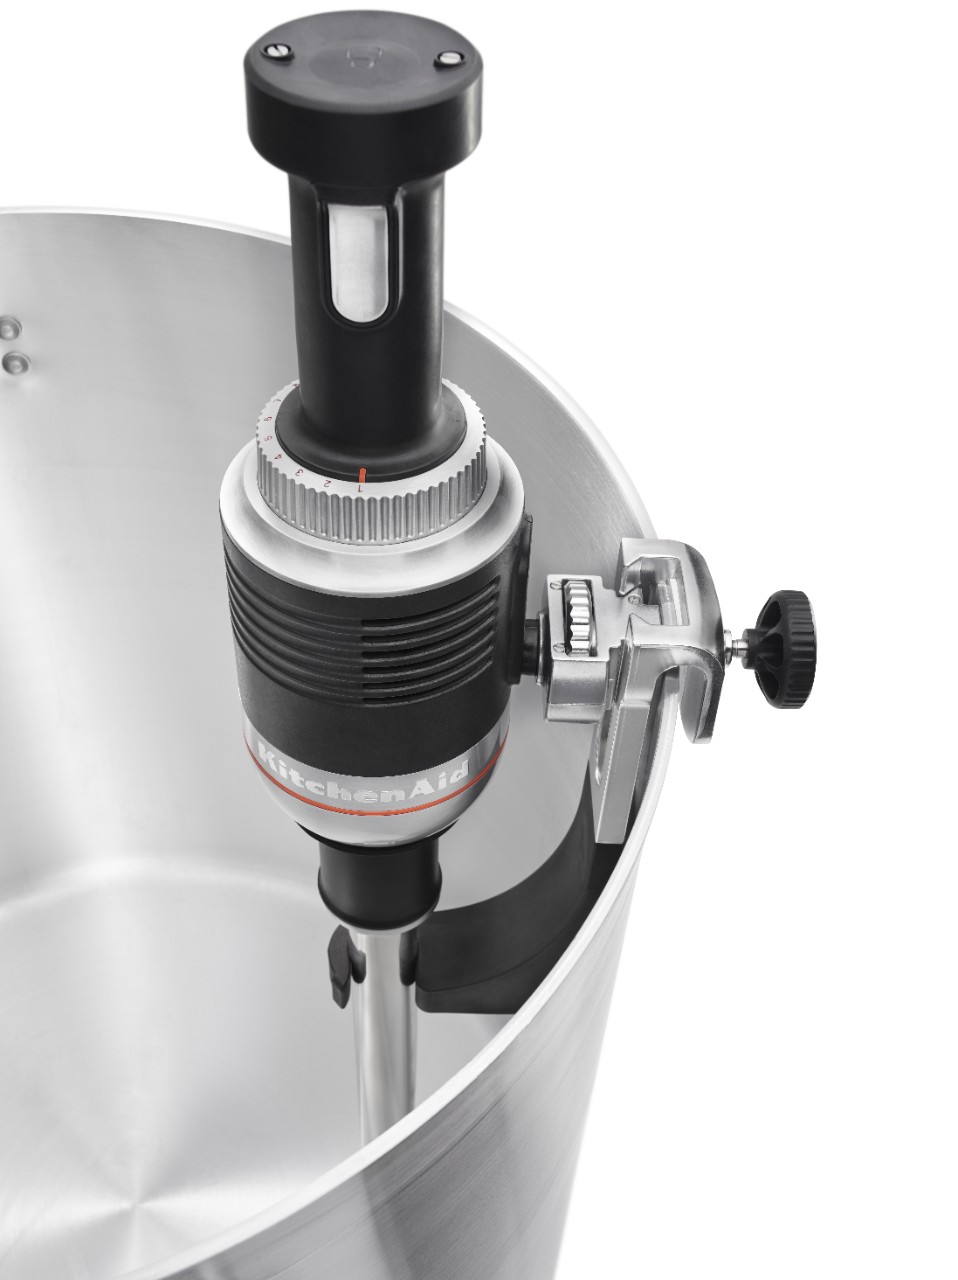 Find sleek, commercial results from our immersion blenders